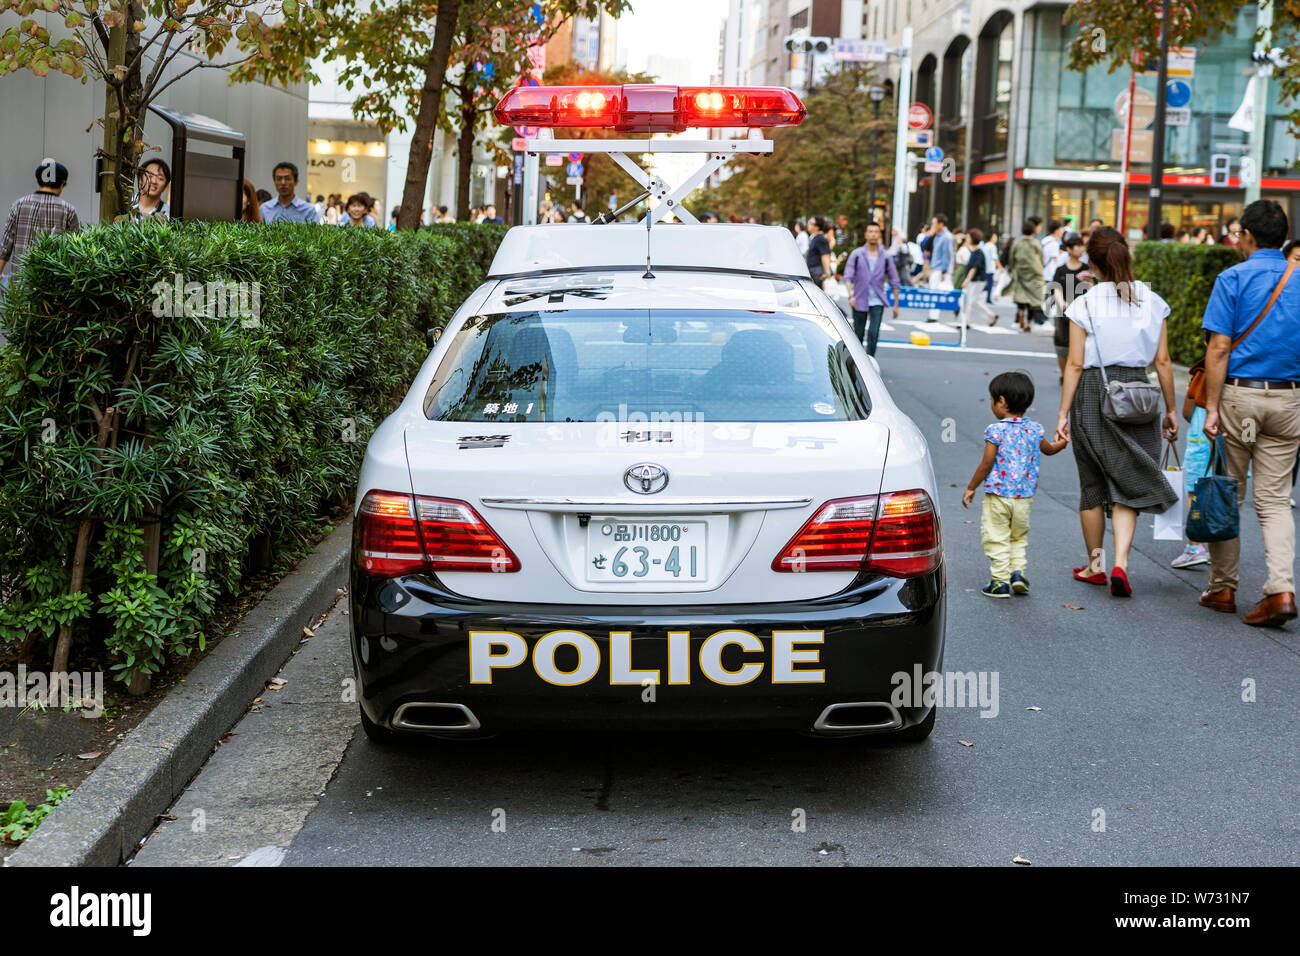 TOKYO, JAPAN - OCTOBER 6, 2018. Japanese Police Patrol Car Is Doing Civil Servant For Public Safety In The Crowd. Stock Photo